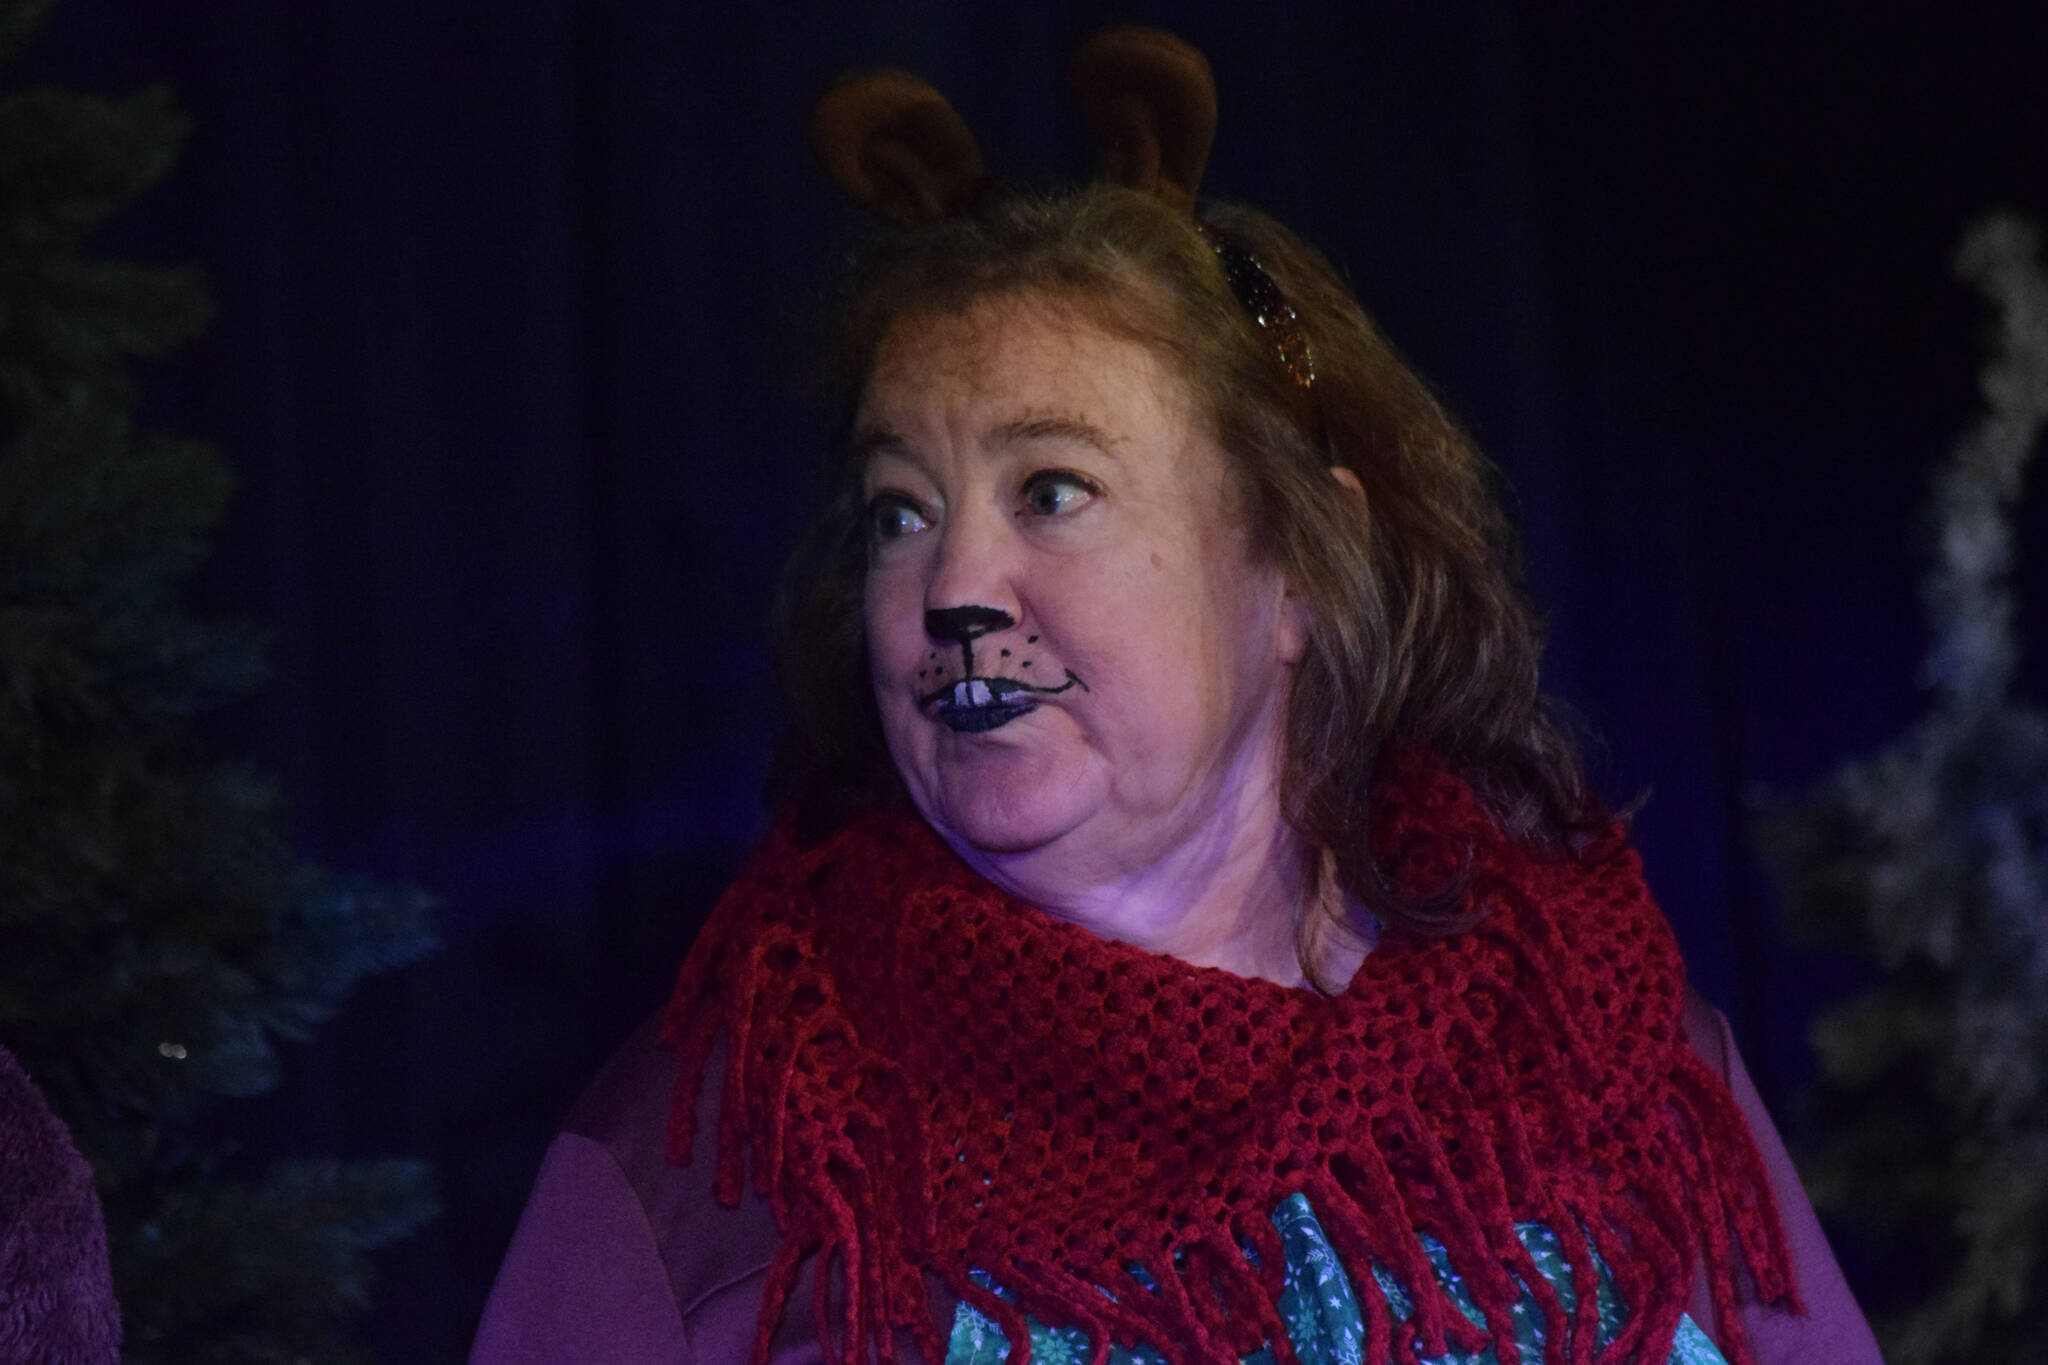 Terri Burdick acts as her character Mrs. Burdick during the Triumvirate Theater’s rehearsal of “The Chronicles of Narnia: The Lion, the Witch and the Wardrobe” at Kenai Central High School on Tuesday, Dec. 14, 2021. (Camille Botello/Peninsula Clarion)